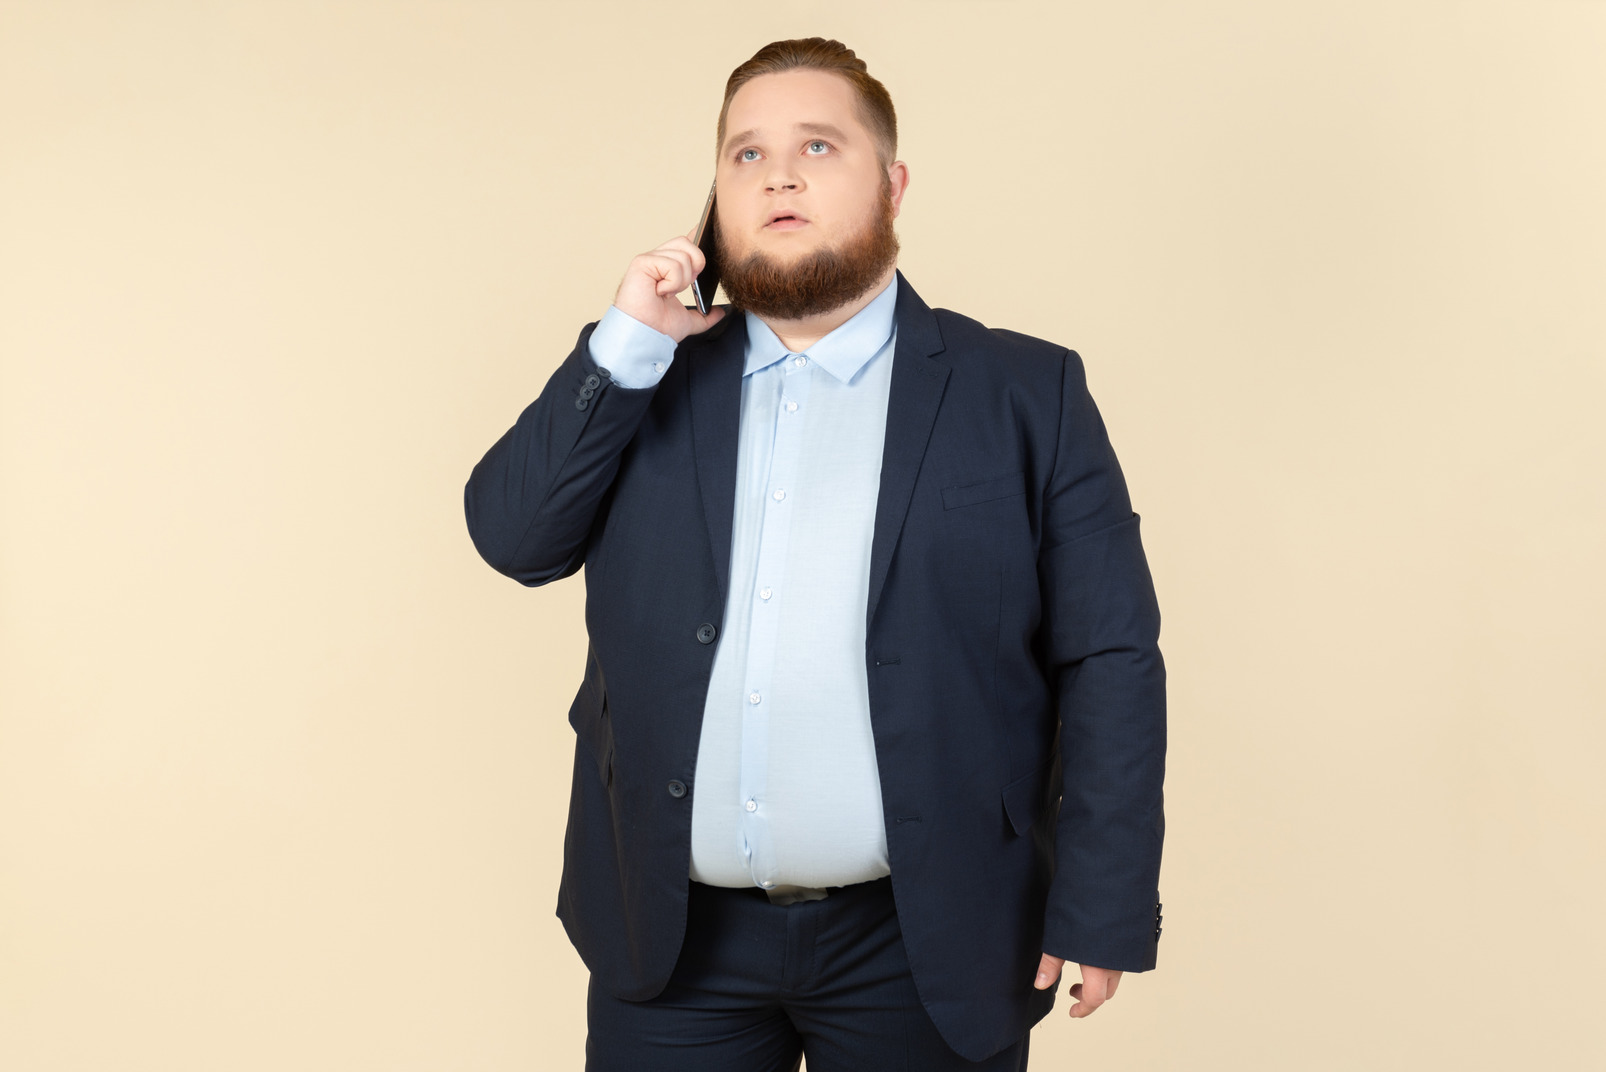 Pensive young overweight office worker talking on the phone